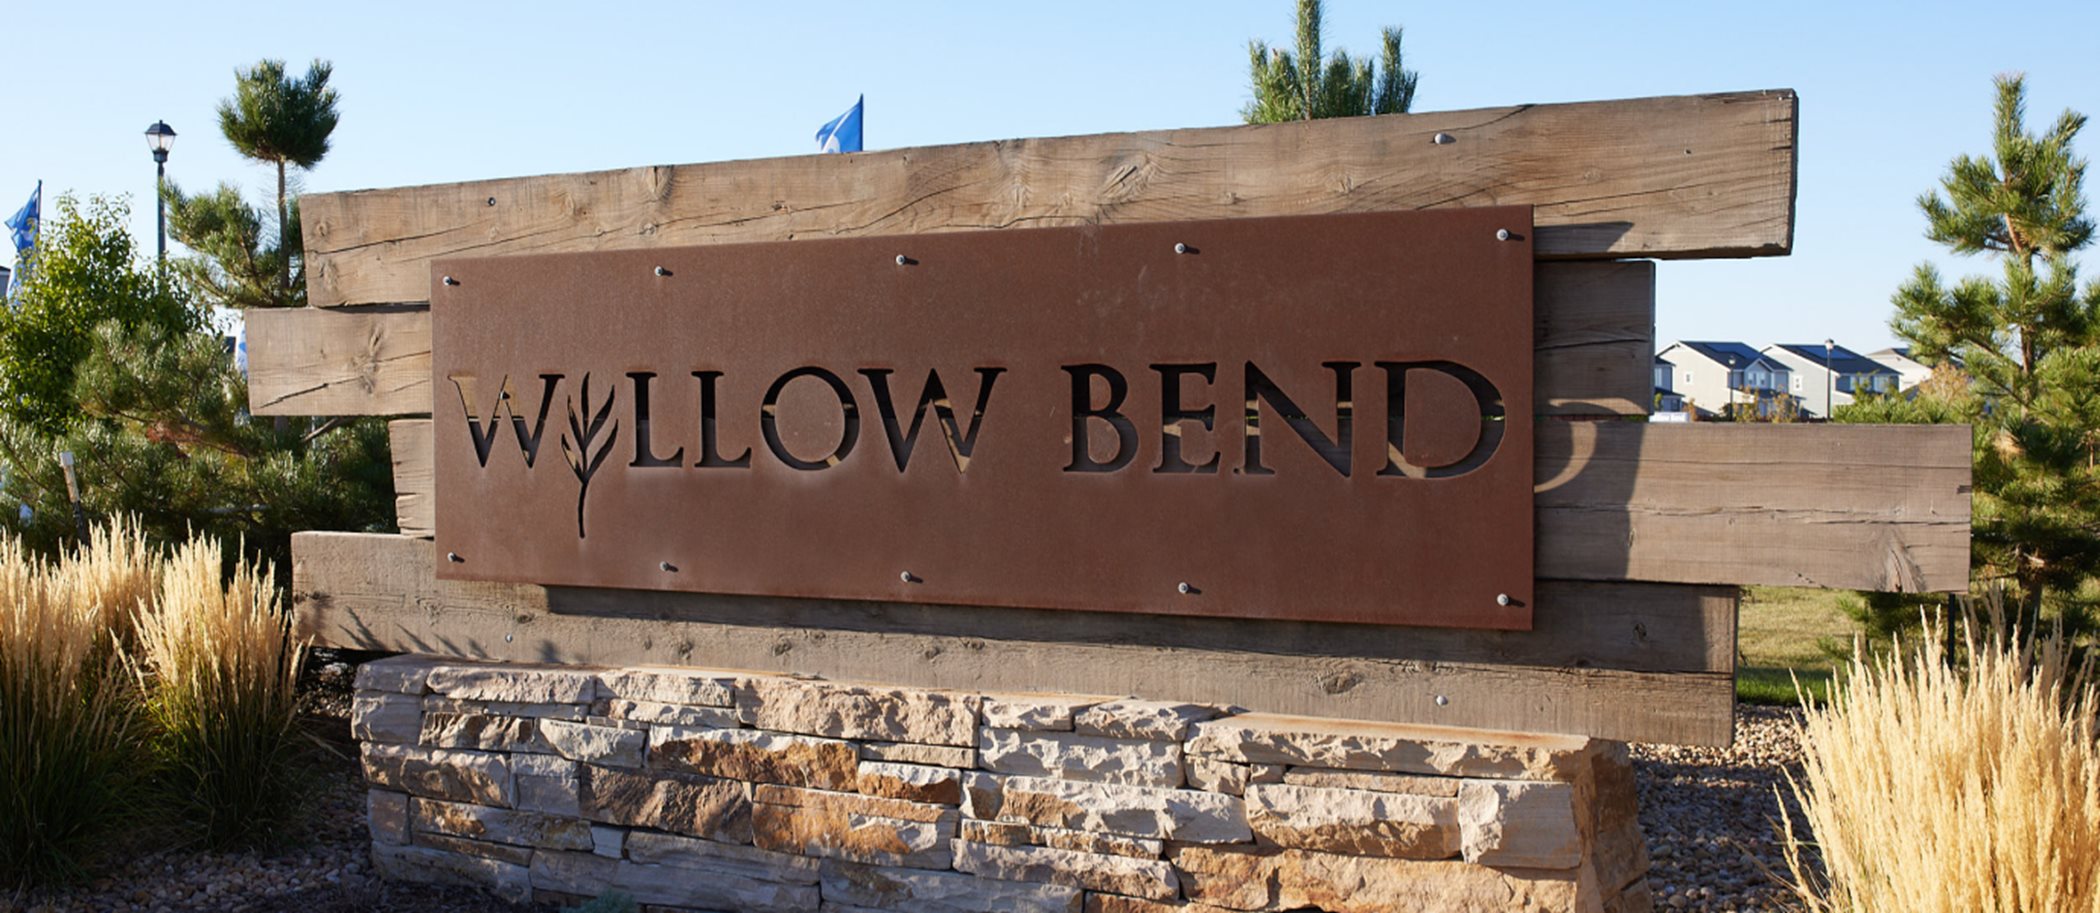 Willow Bend welcome sign